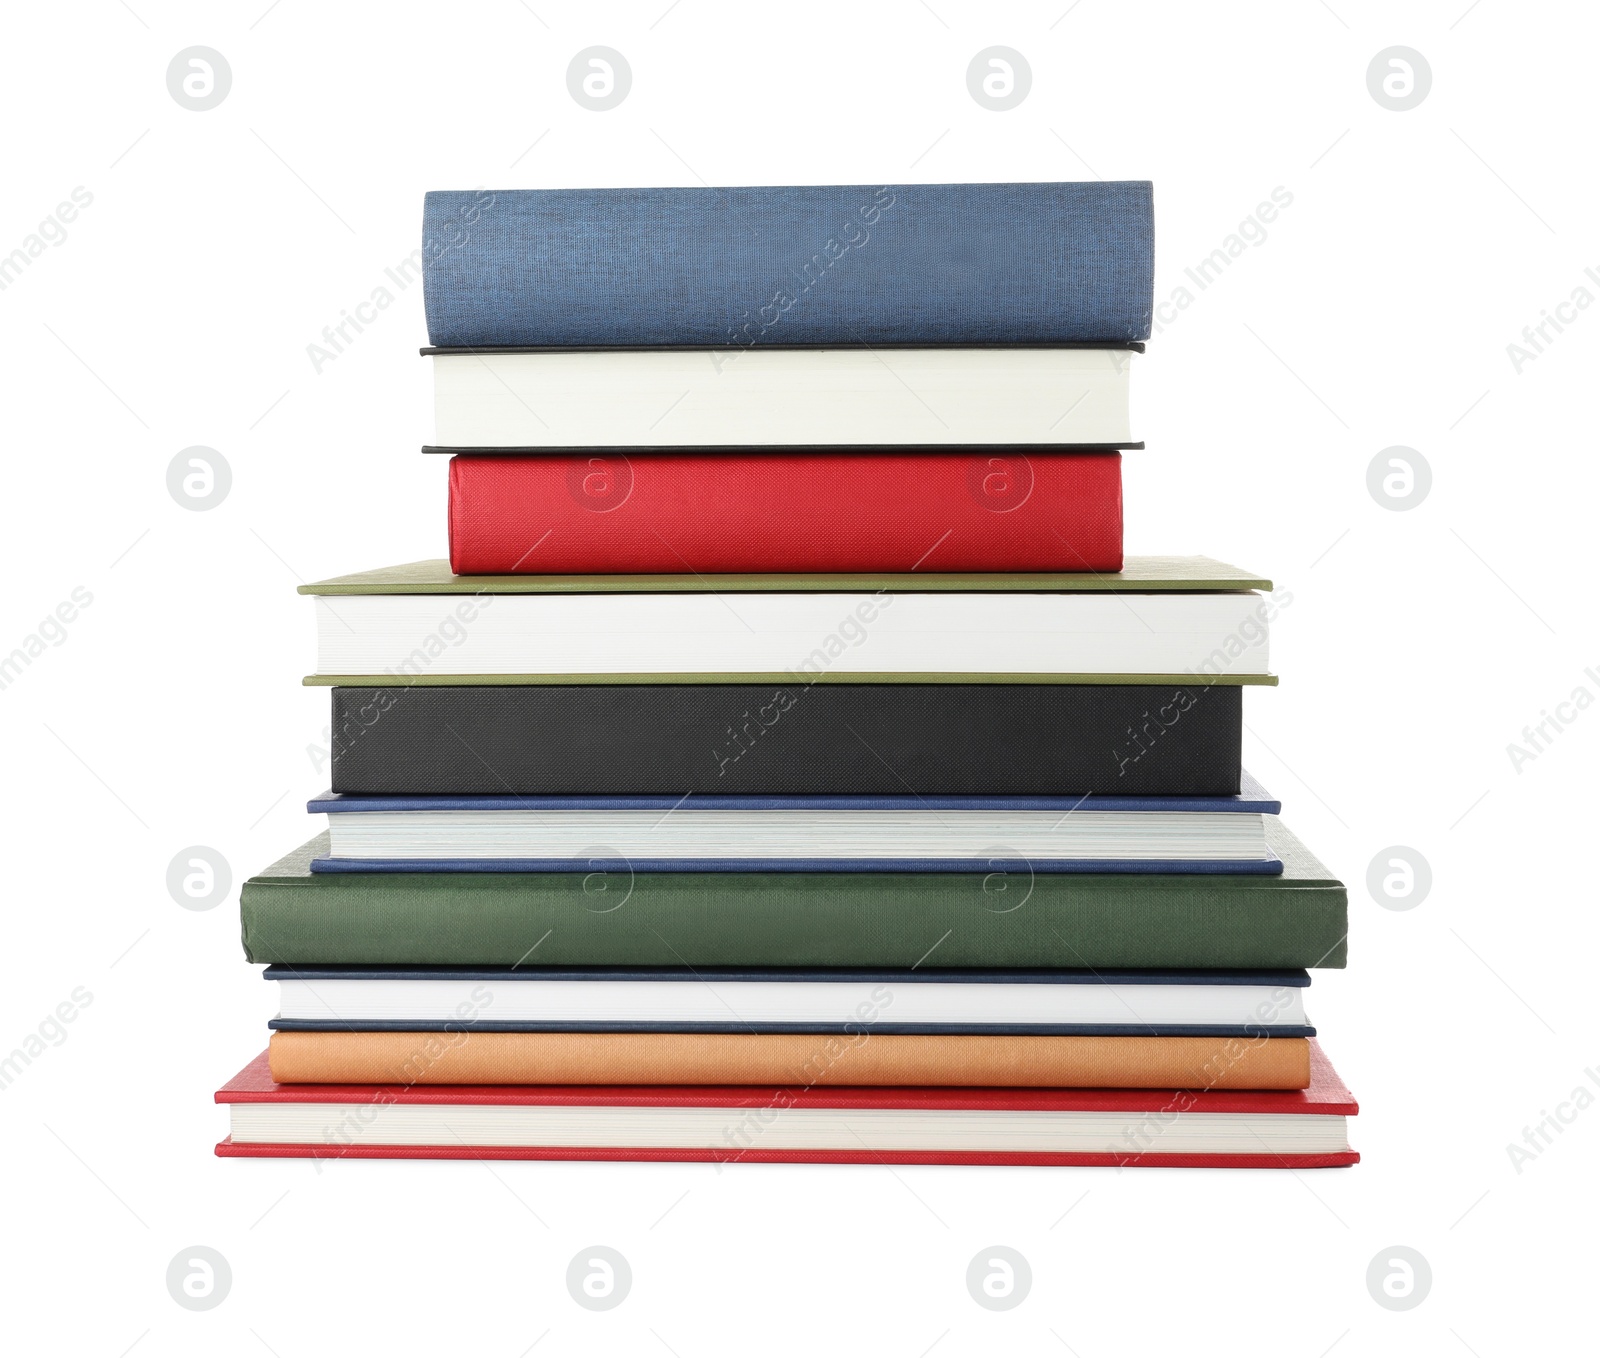 Photo of Many different books stacked on white background